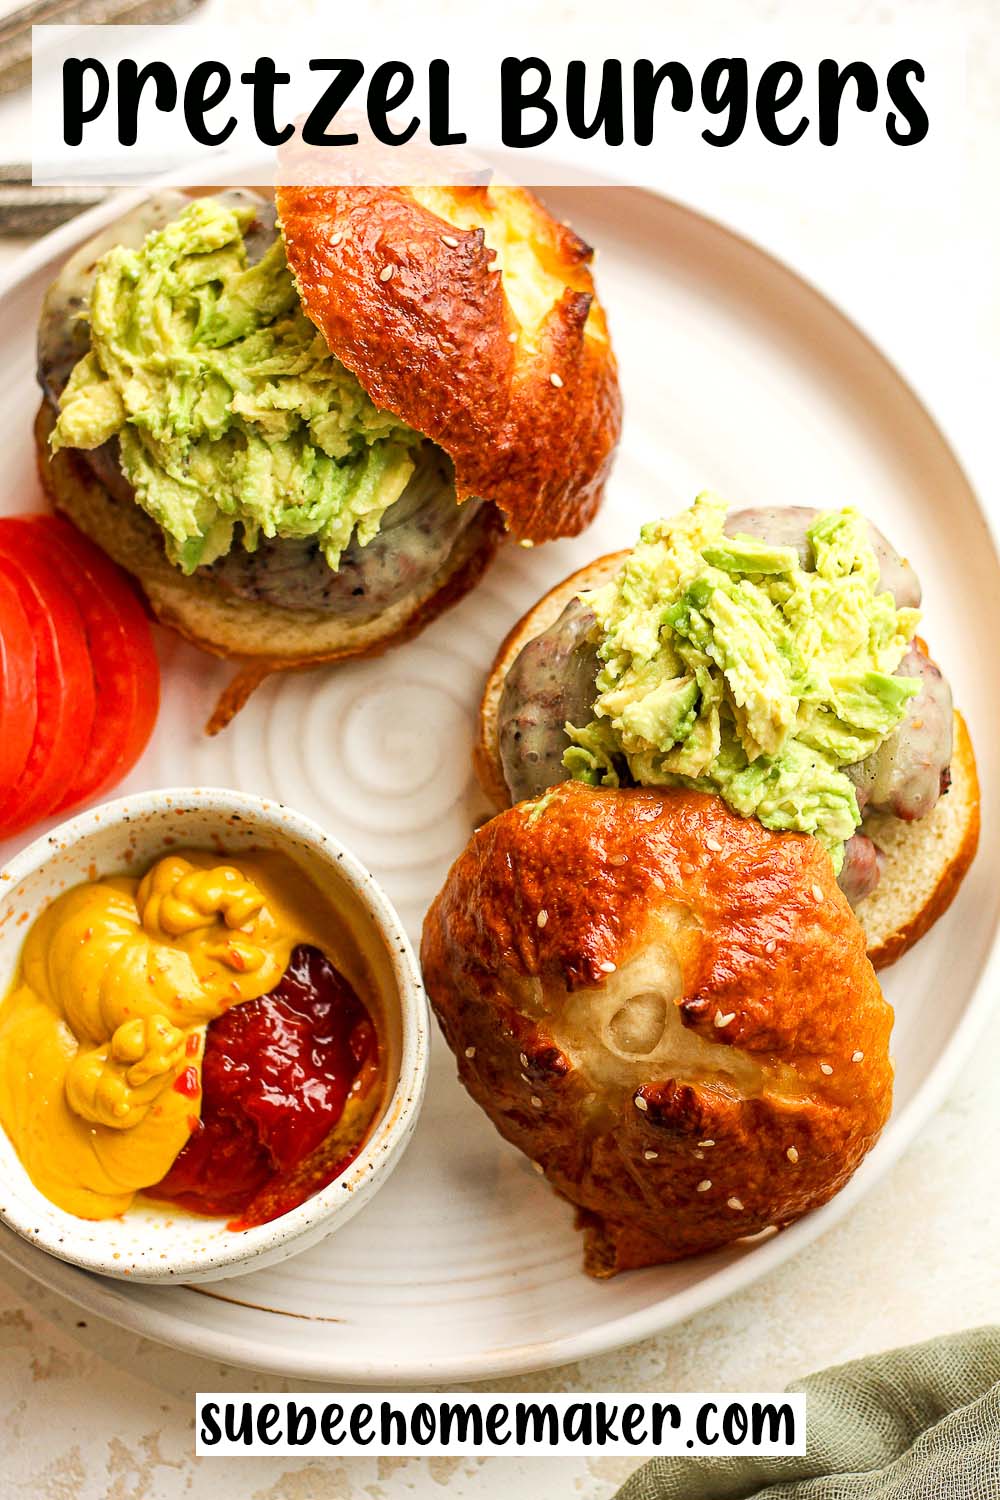 A plate of two pretzel burgers with avocado.